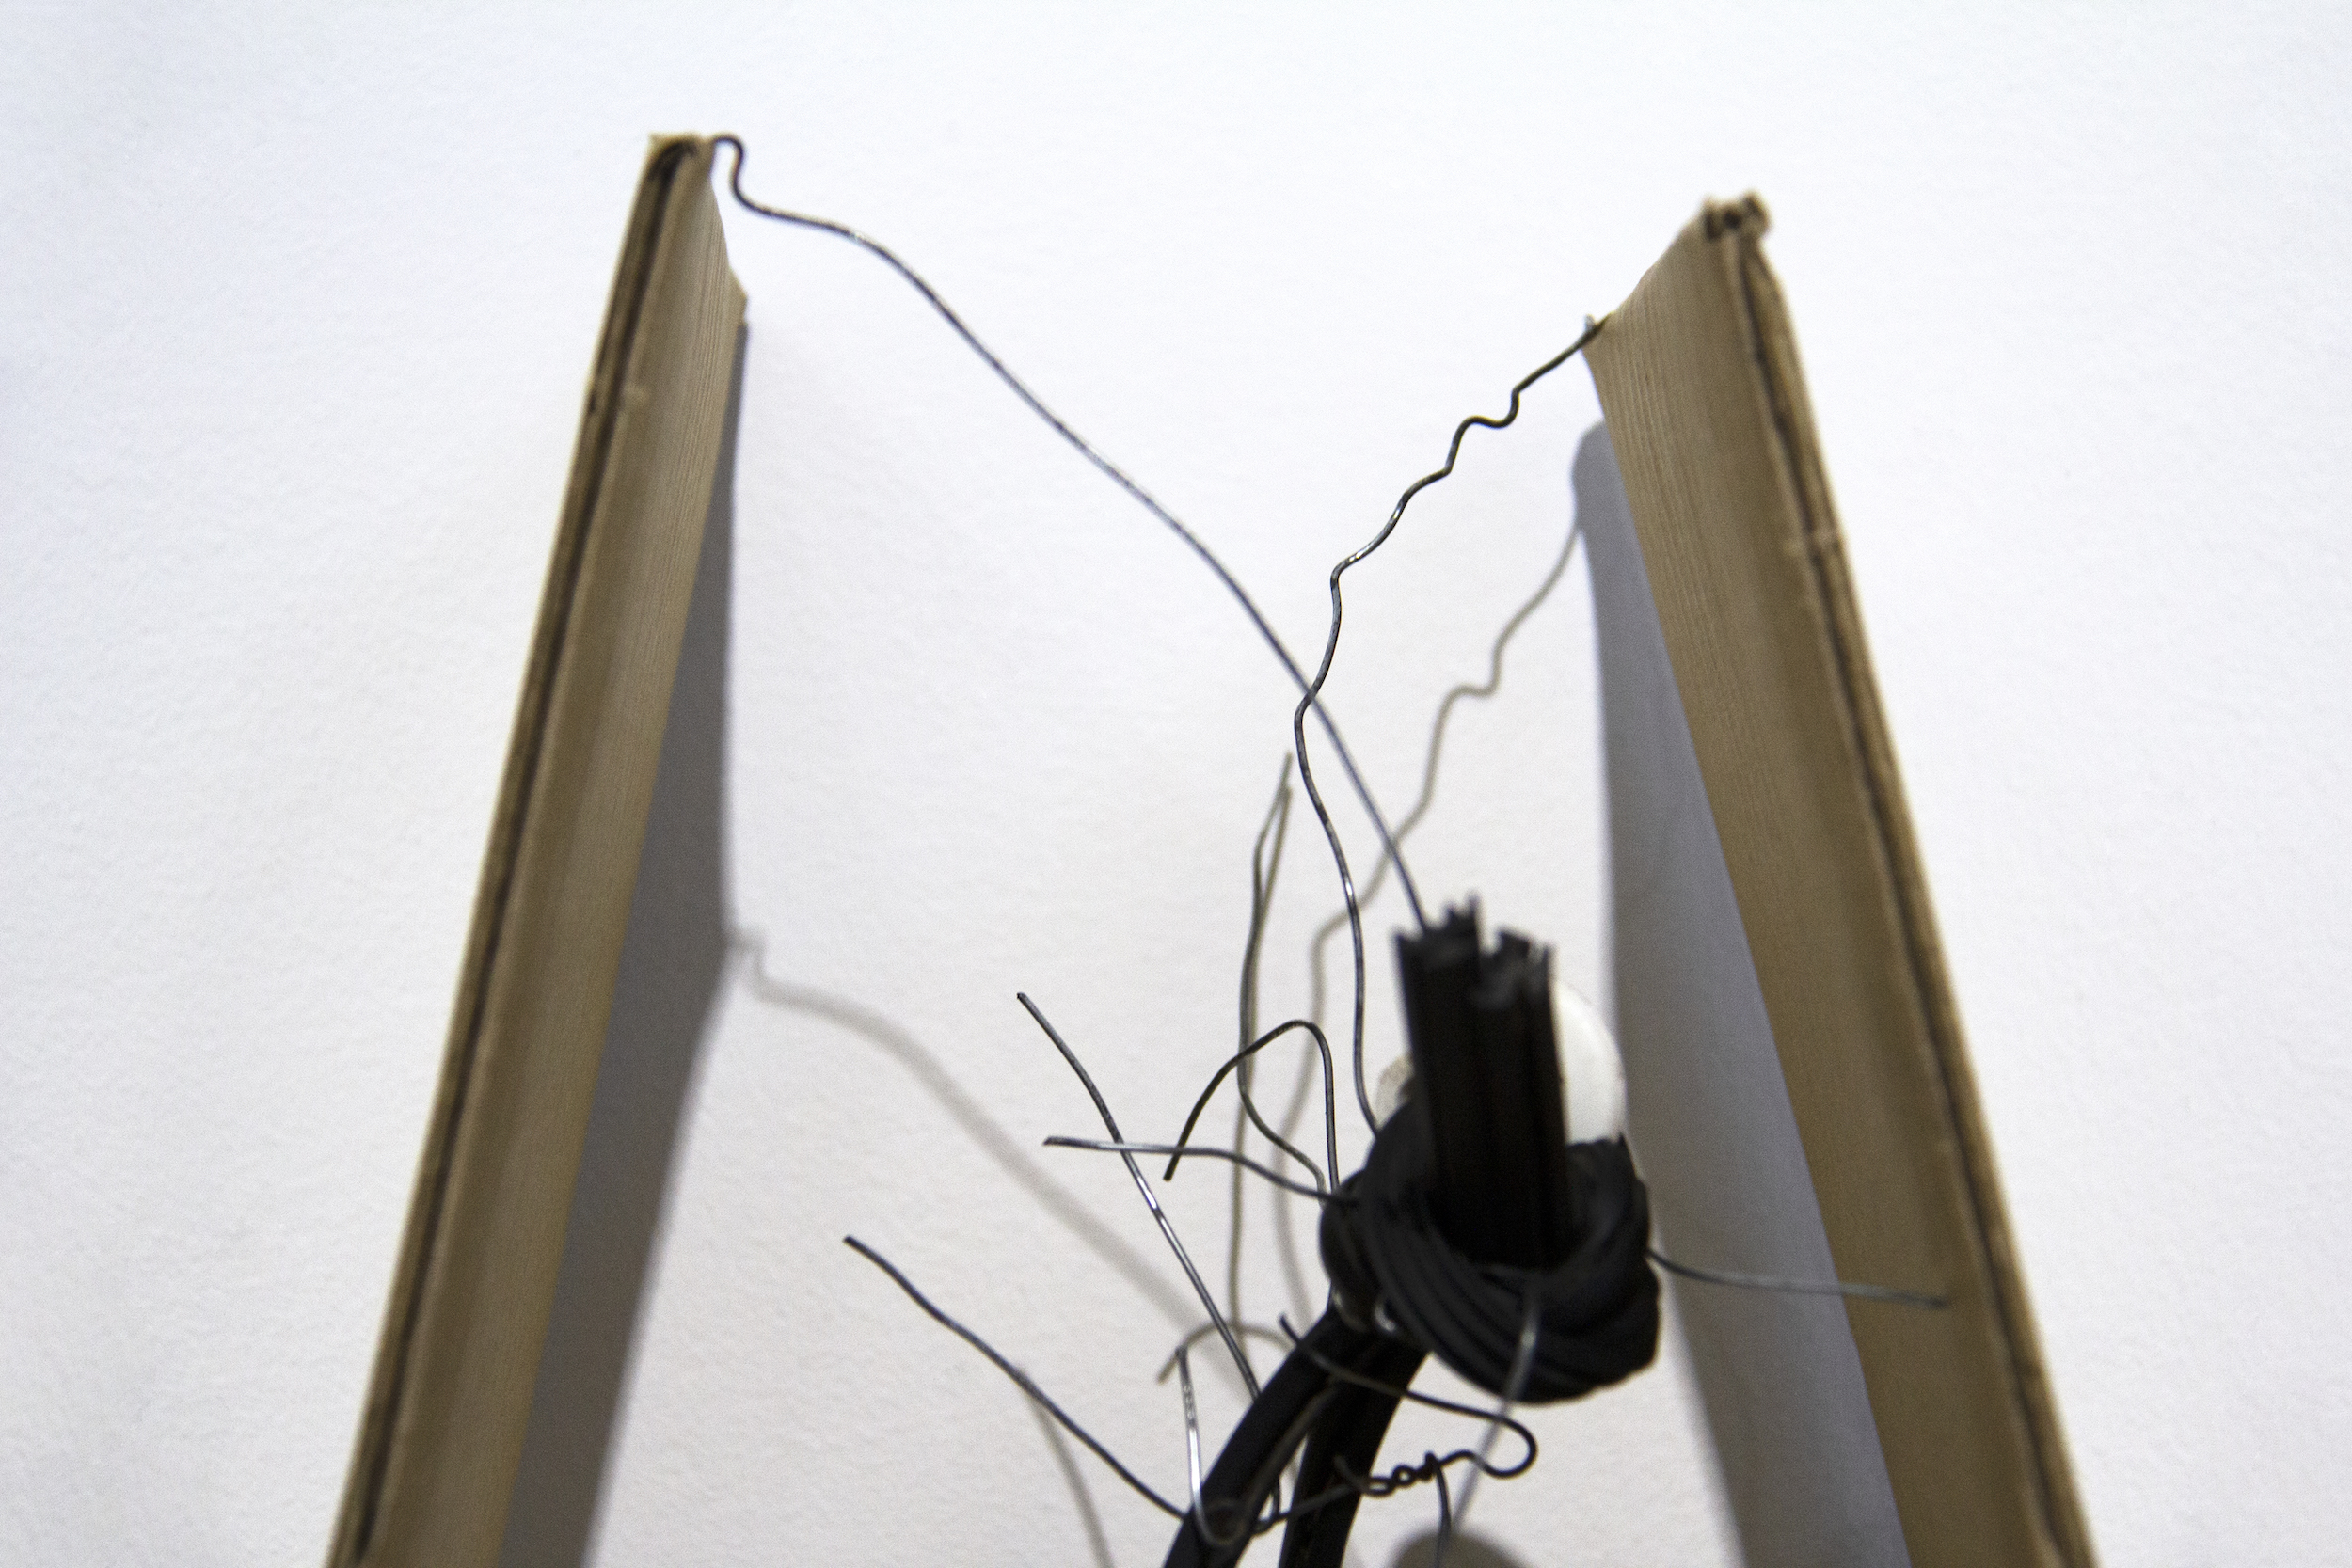    The cradle   (detail)  Used wire from funeral tent and cardboard packaging; found wooden structure, rubber tubing, plastic knob; and acrylic paint  Approx. 17 6/8 x 12 6/8 x 16 1/2 inches  2019 